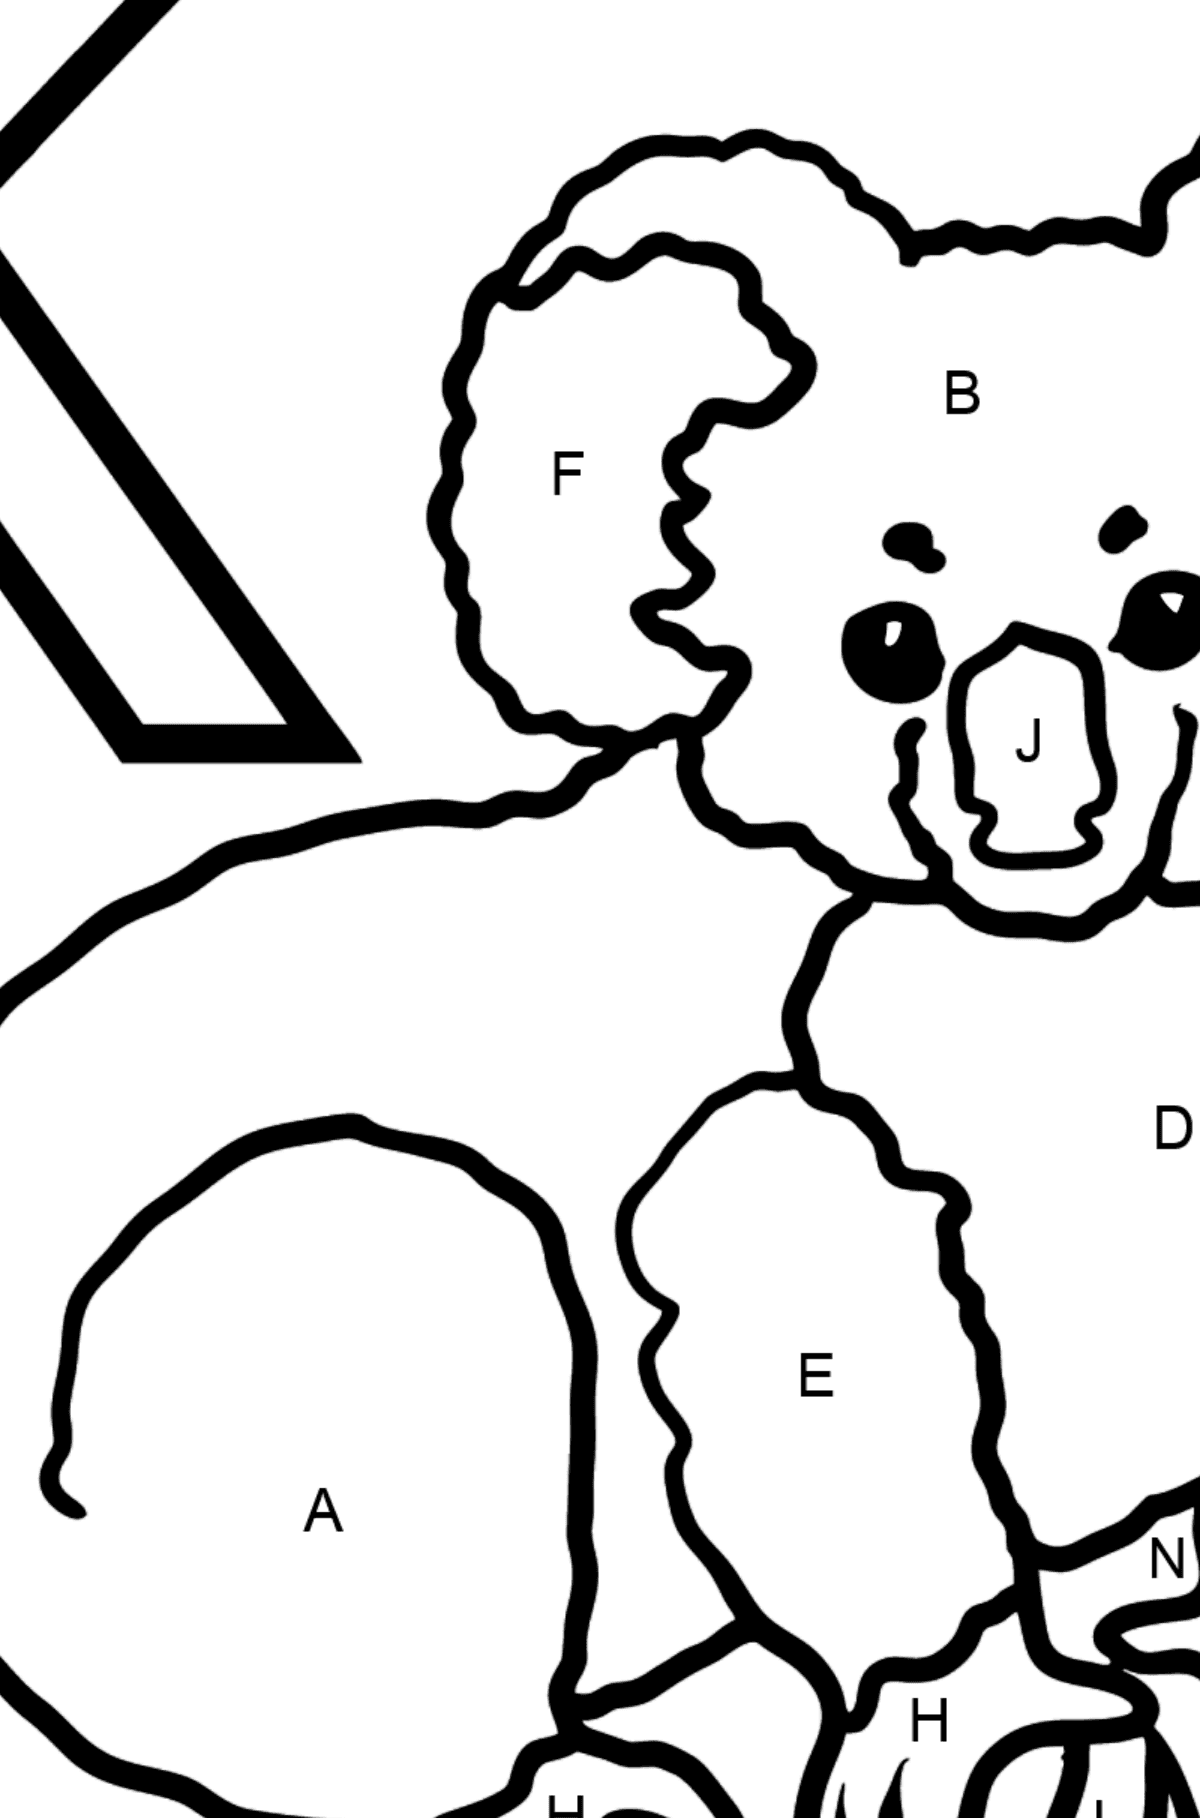 Spanish Letter K coloring pages - KOALA - Coloring by Letters for Kids